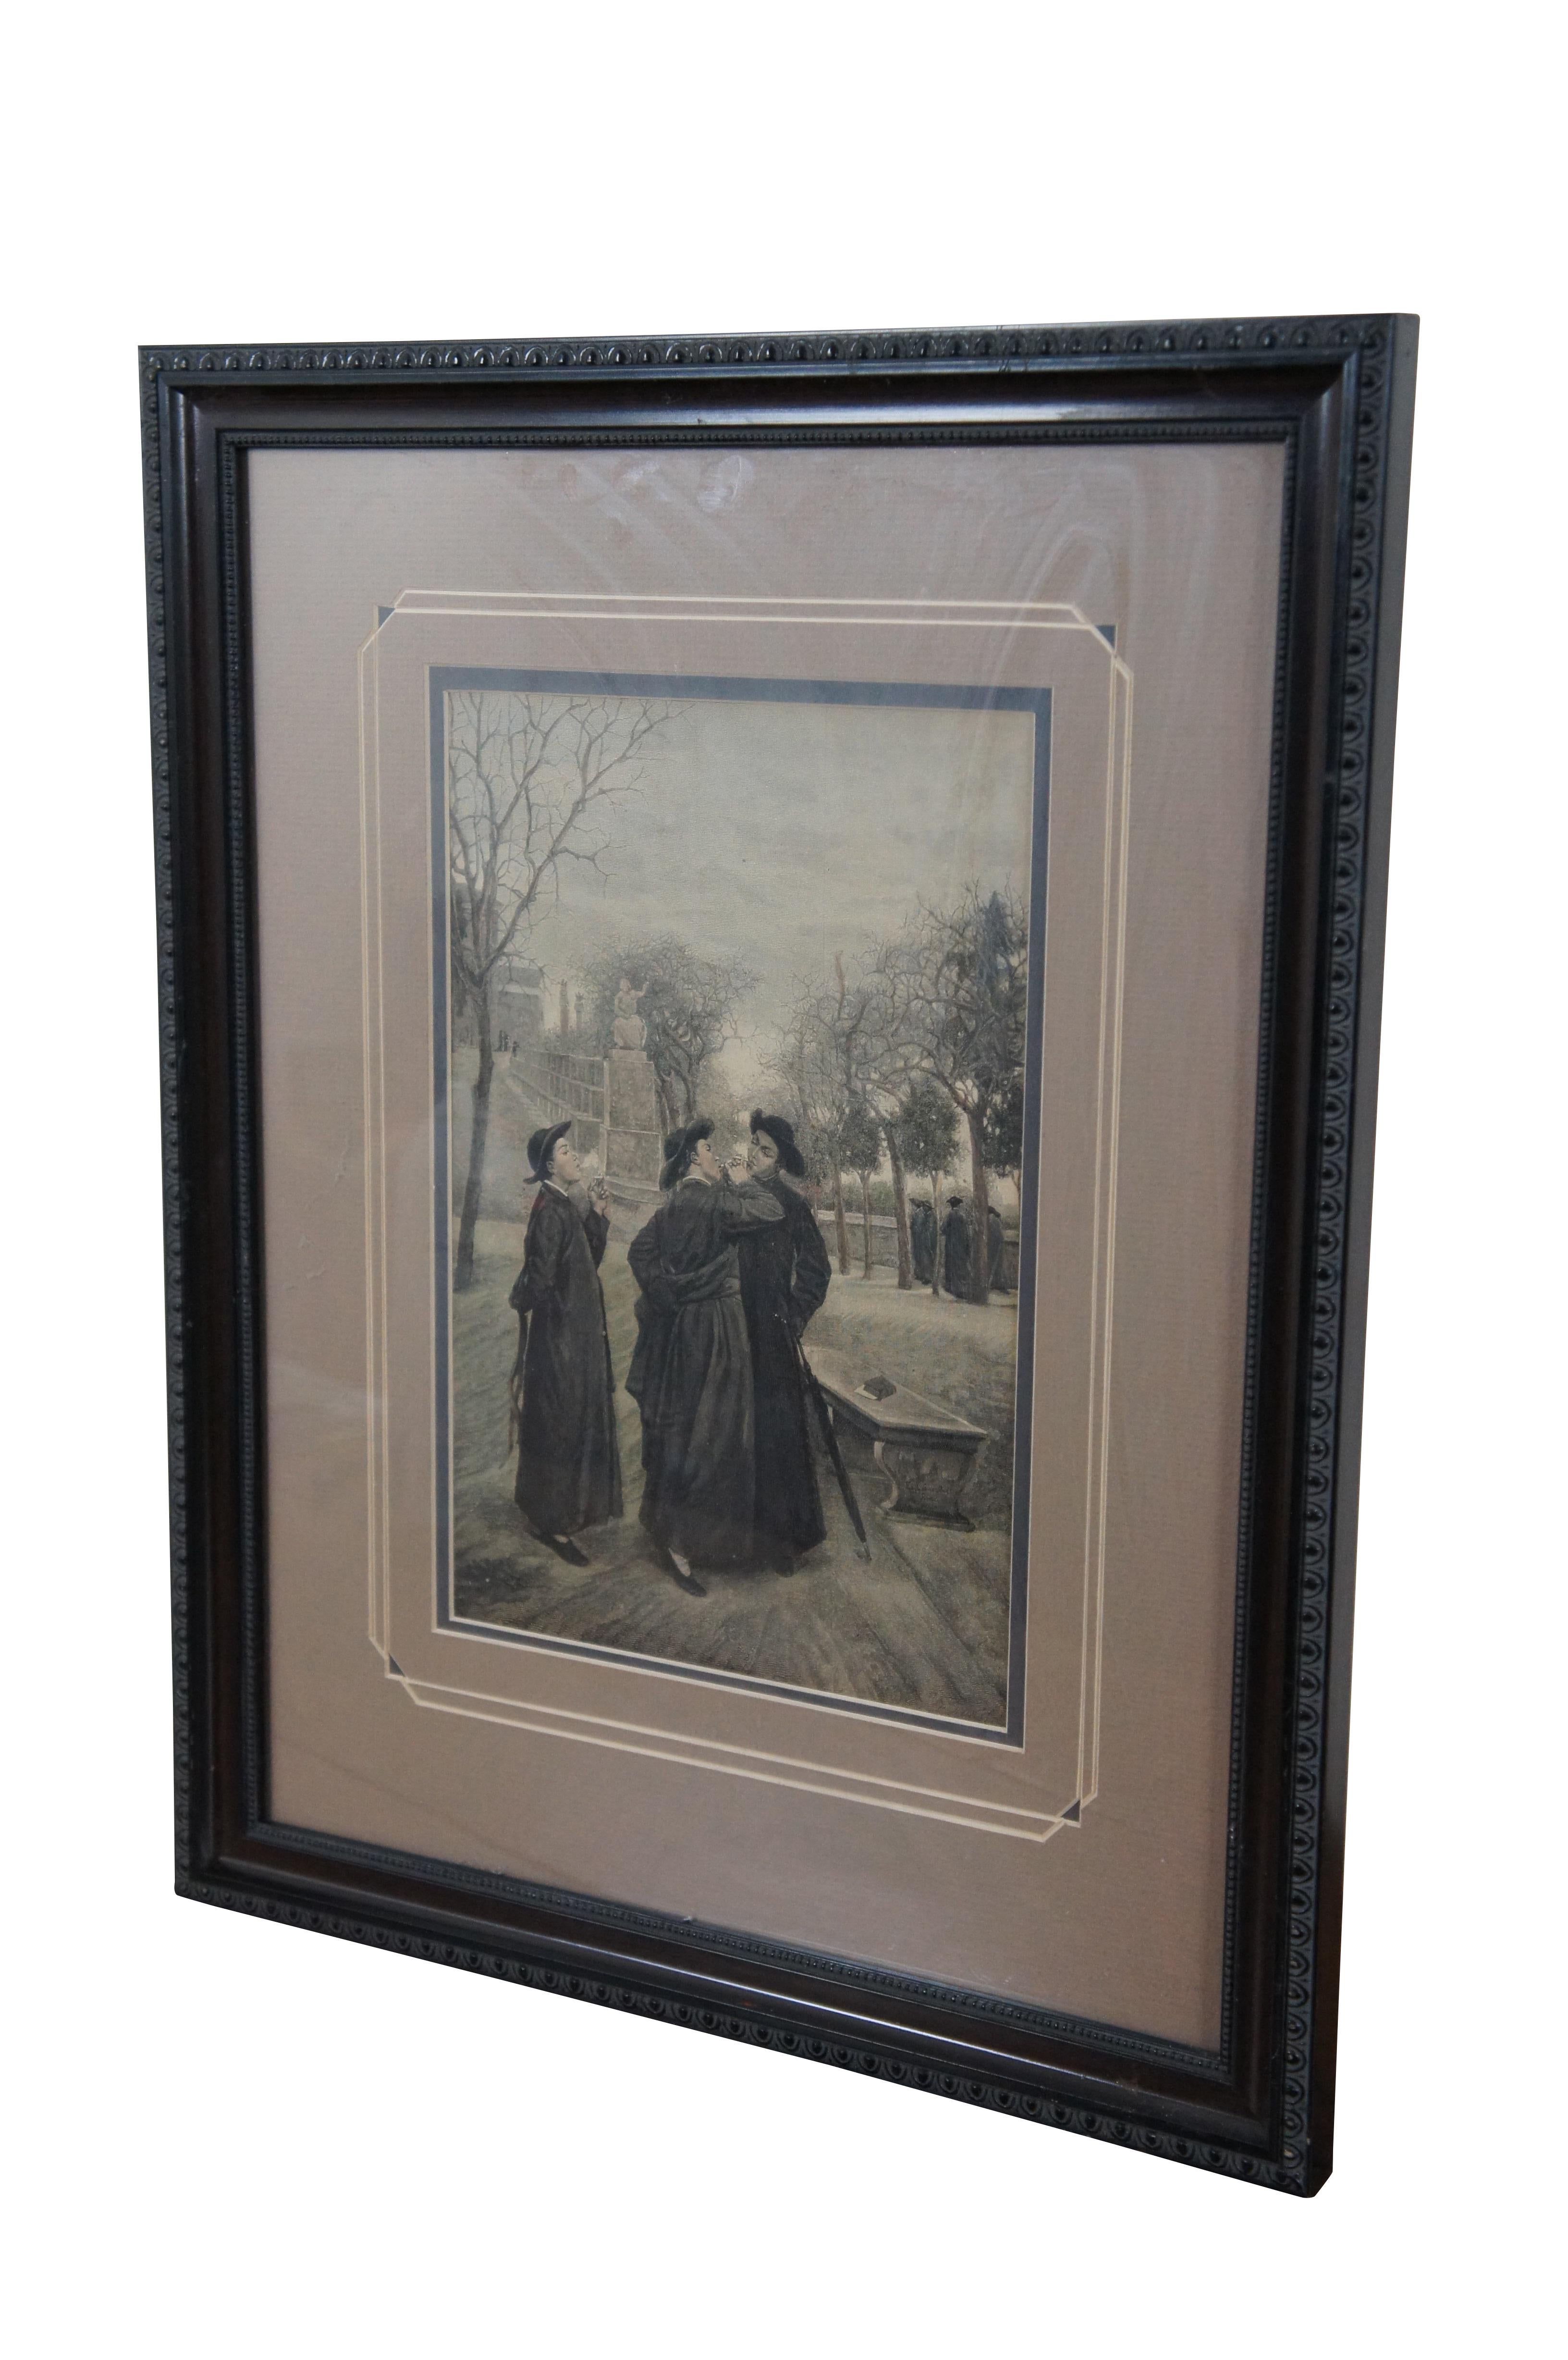 Framed late 19th century hand colored engraving depicting 